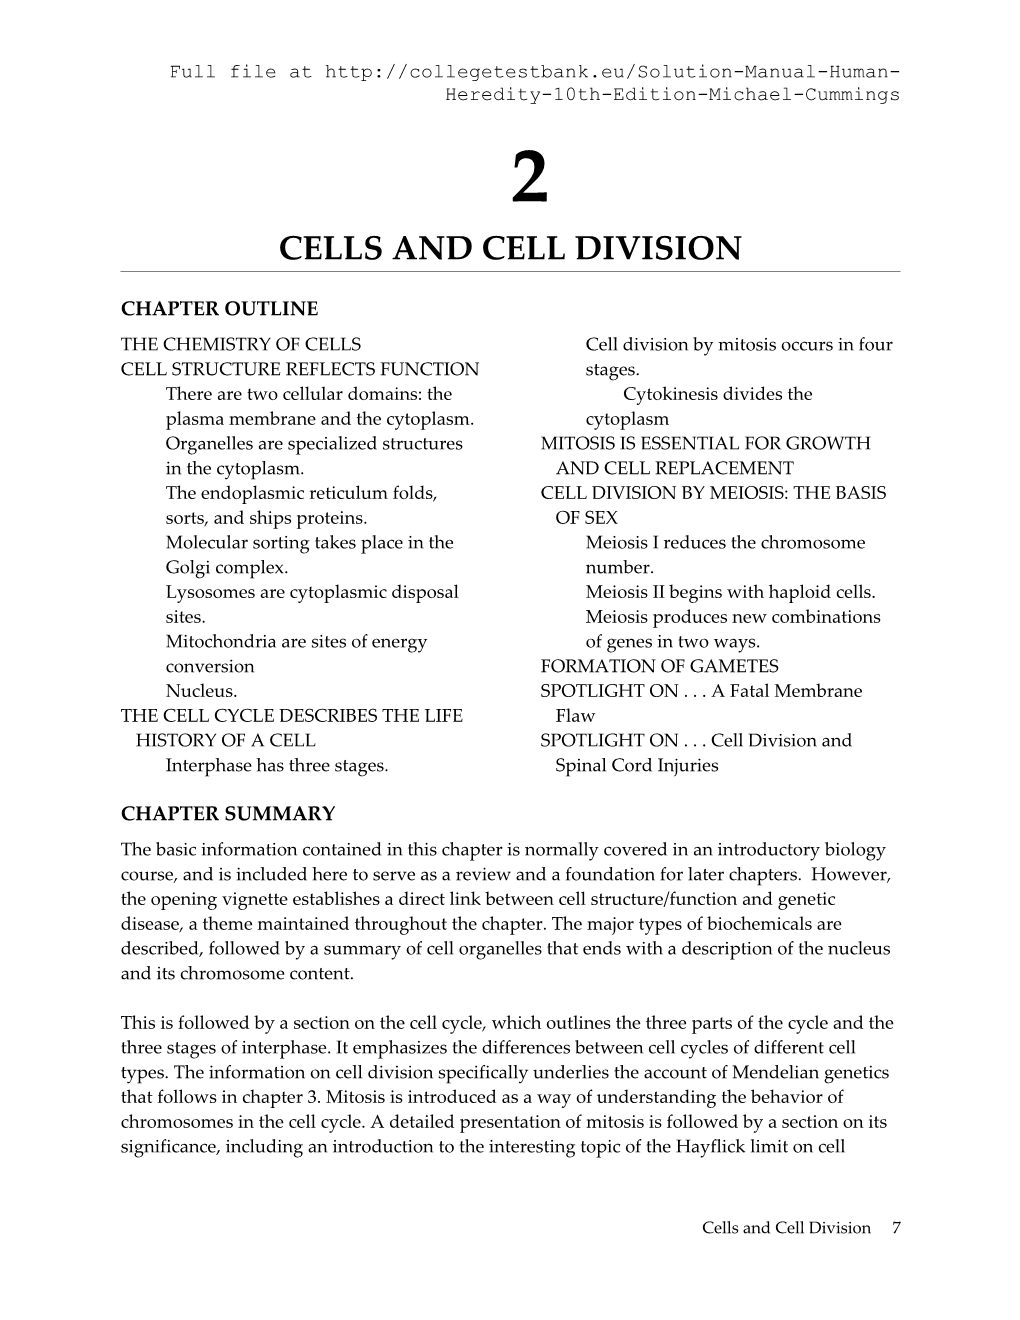 Cells and Cell Division